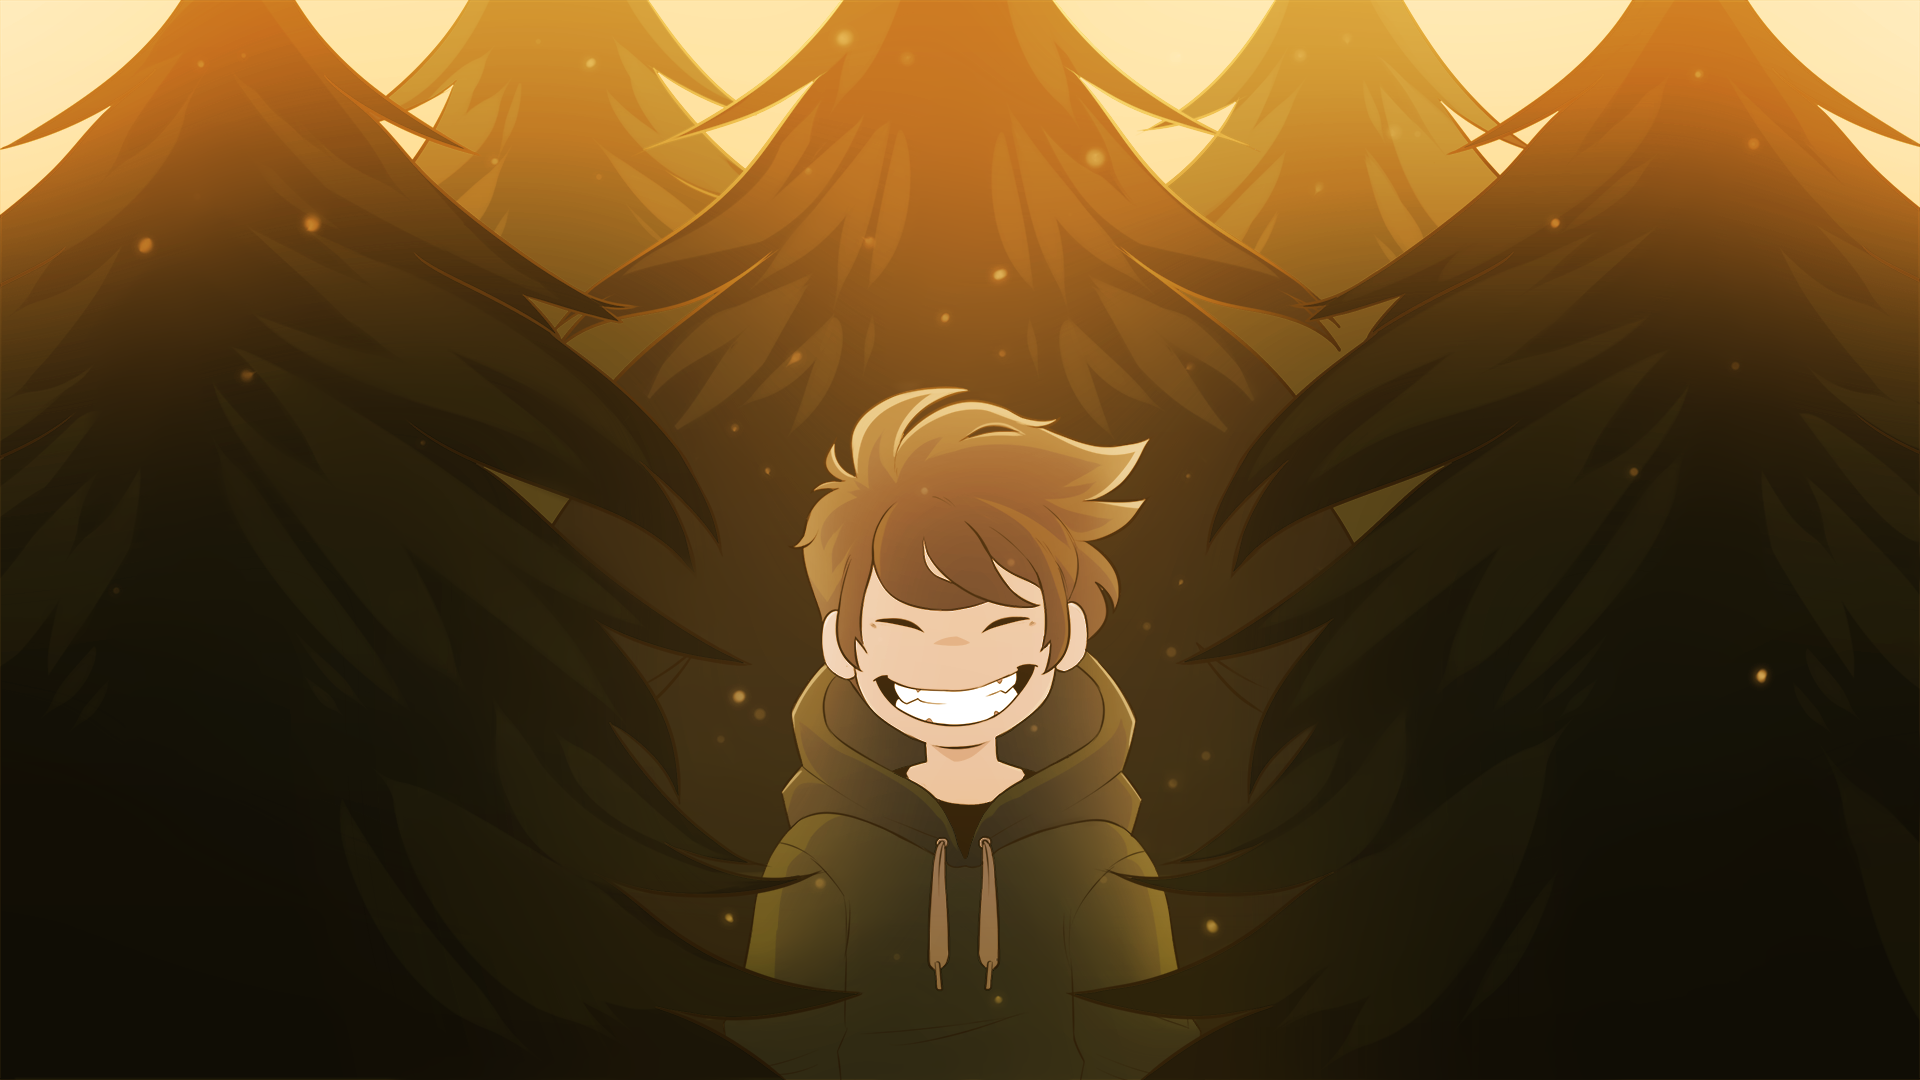 General 1920x1080 heartbound trees smiling Lore forest digital art